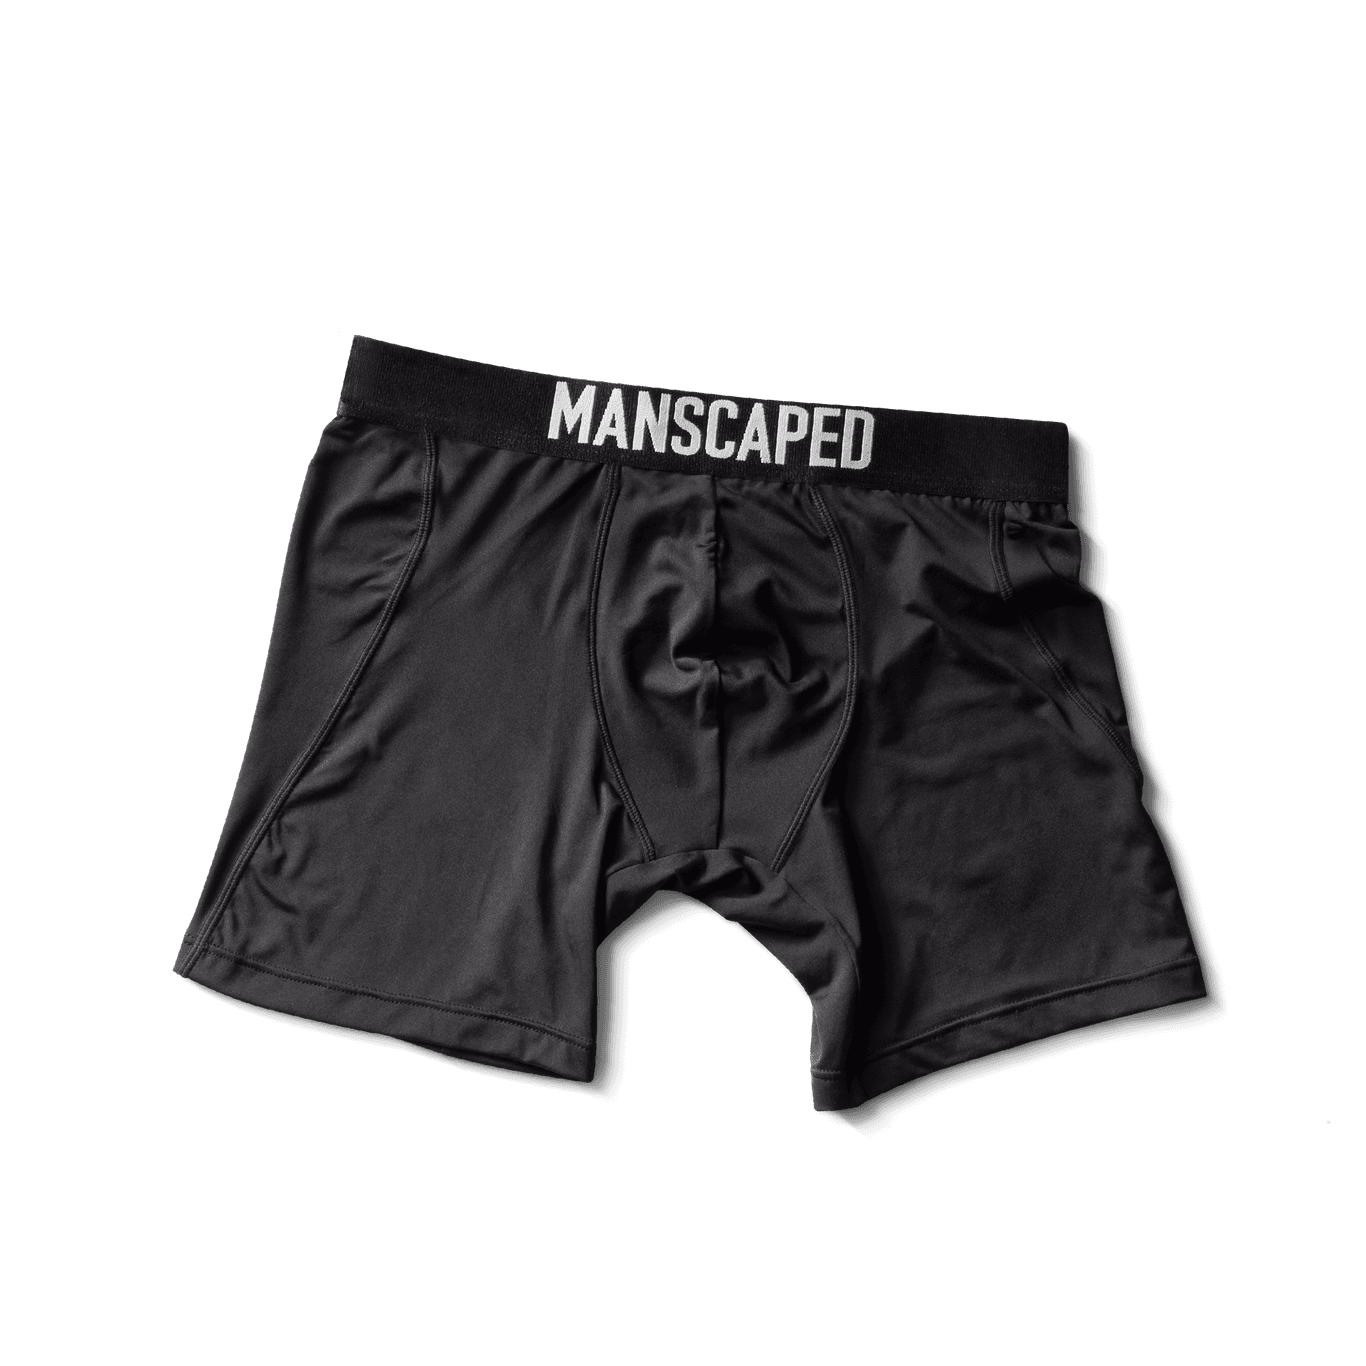 The Art of Shaving Your Ball Sack - Grooming Tips | MANSCAPED™ Blog